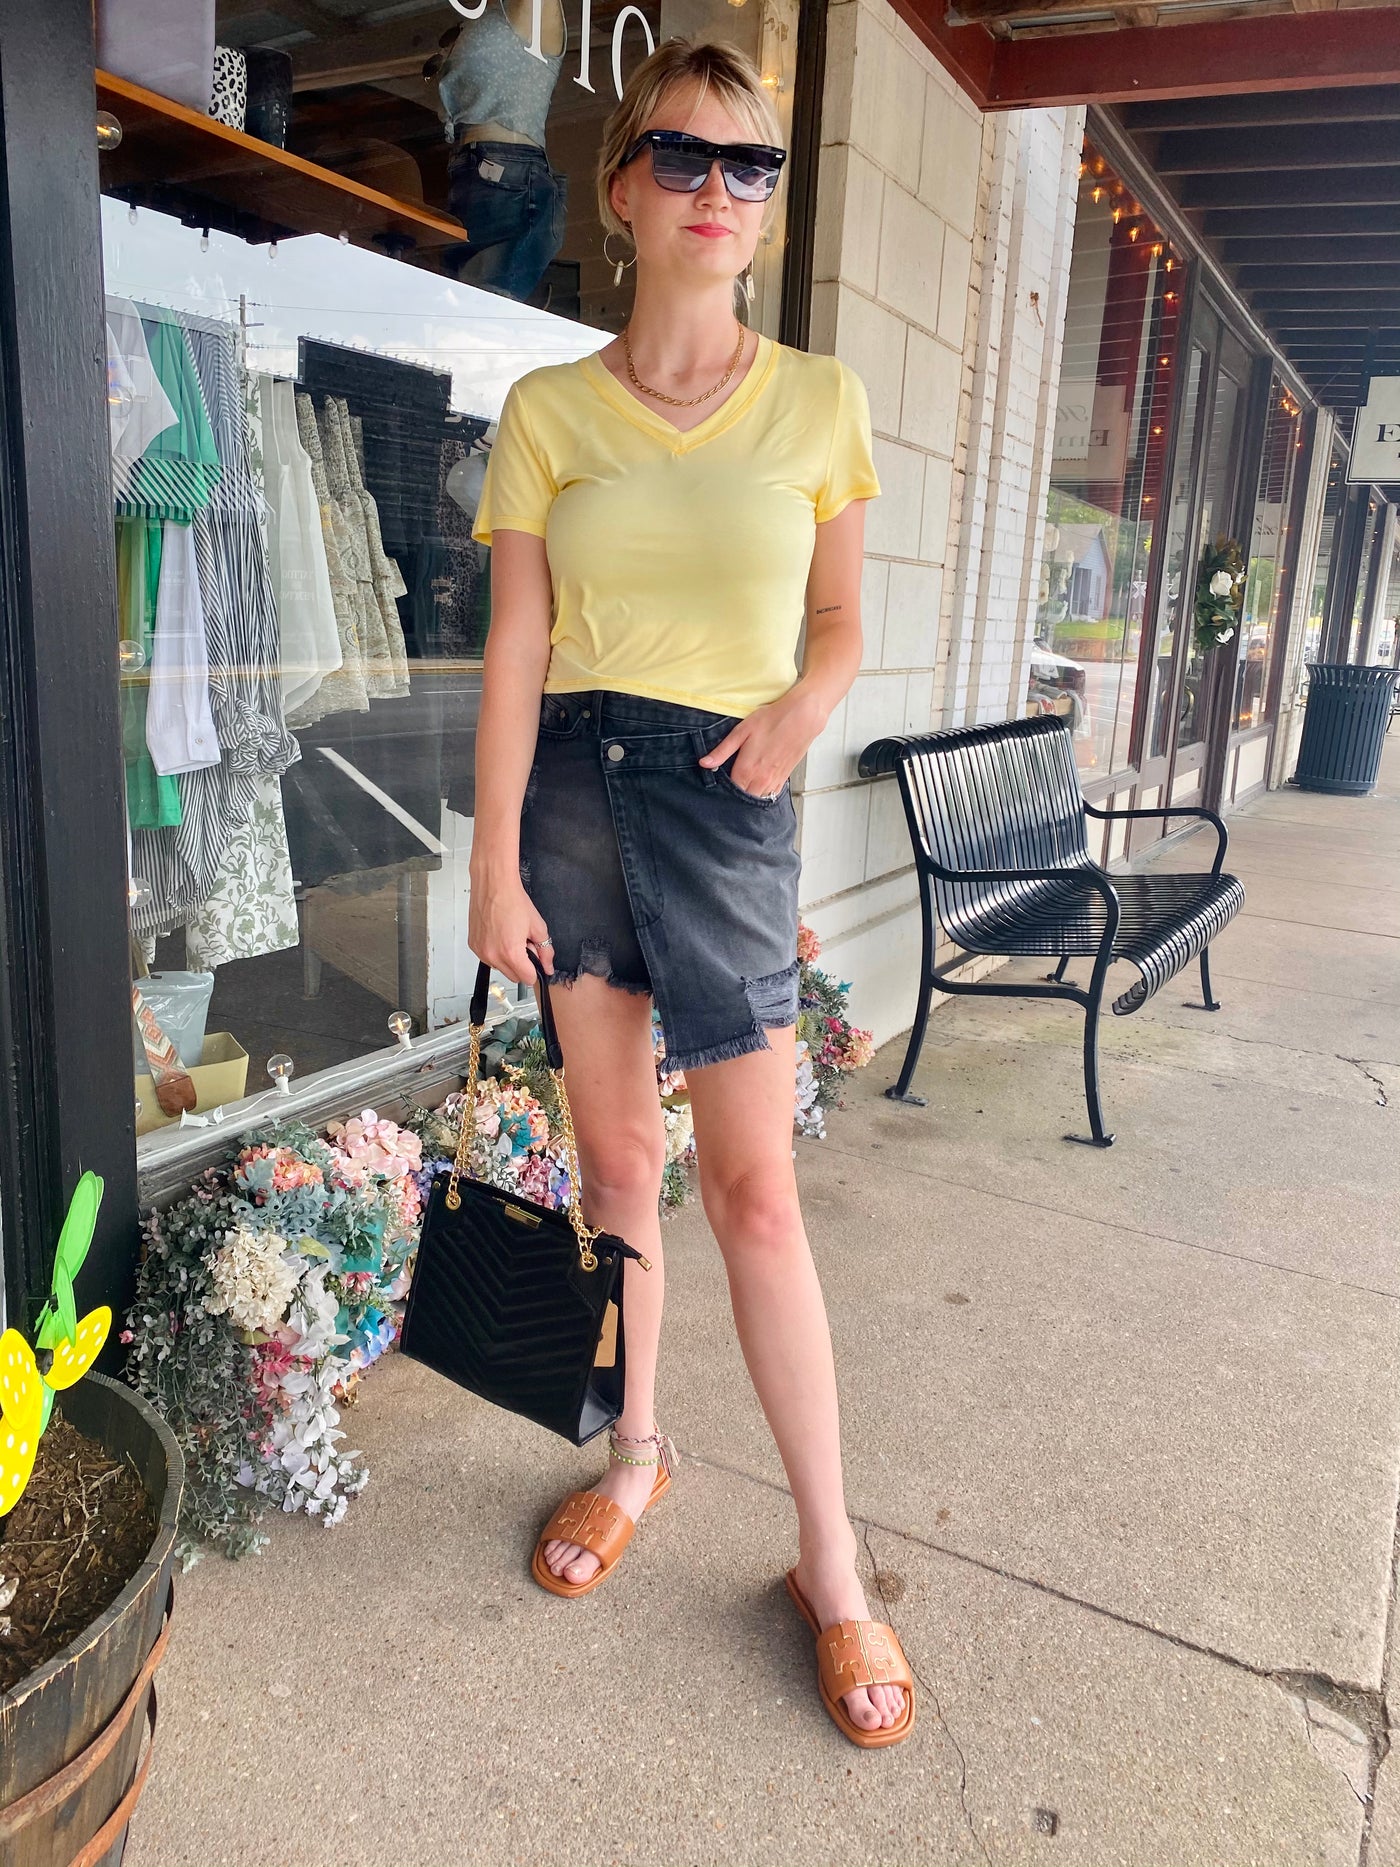 Judy Overlap Skirt by ELAN-Bottoms and Jeans-Anatomy Clothing Boutique in Brenham, Texas